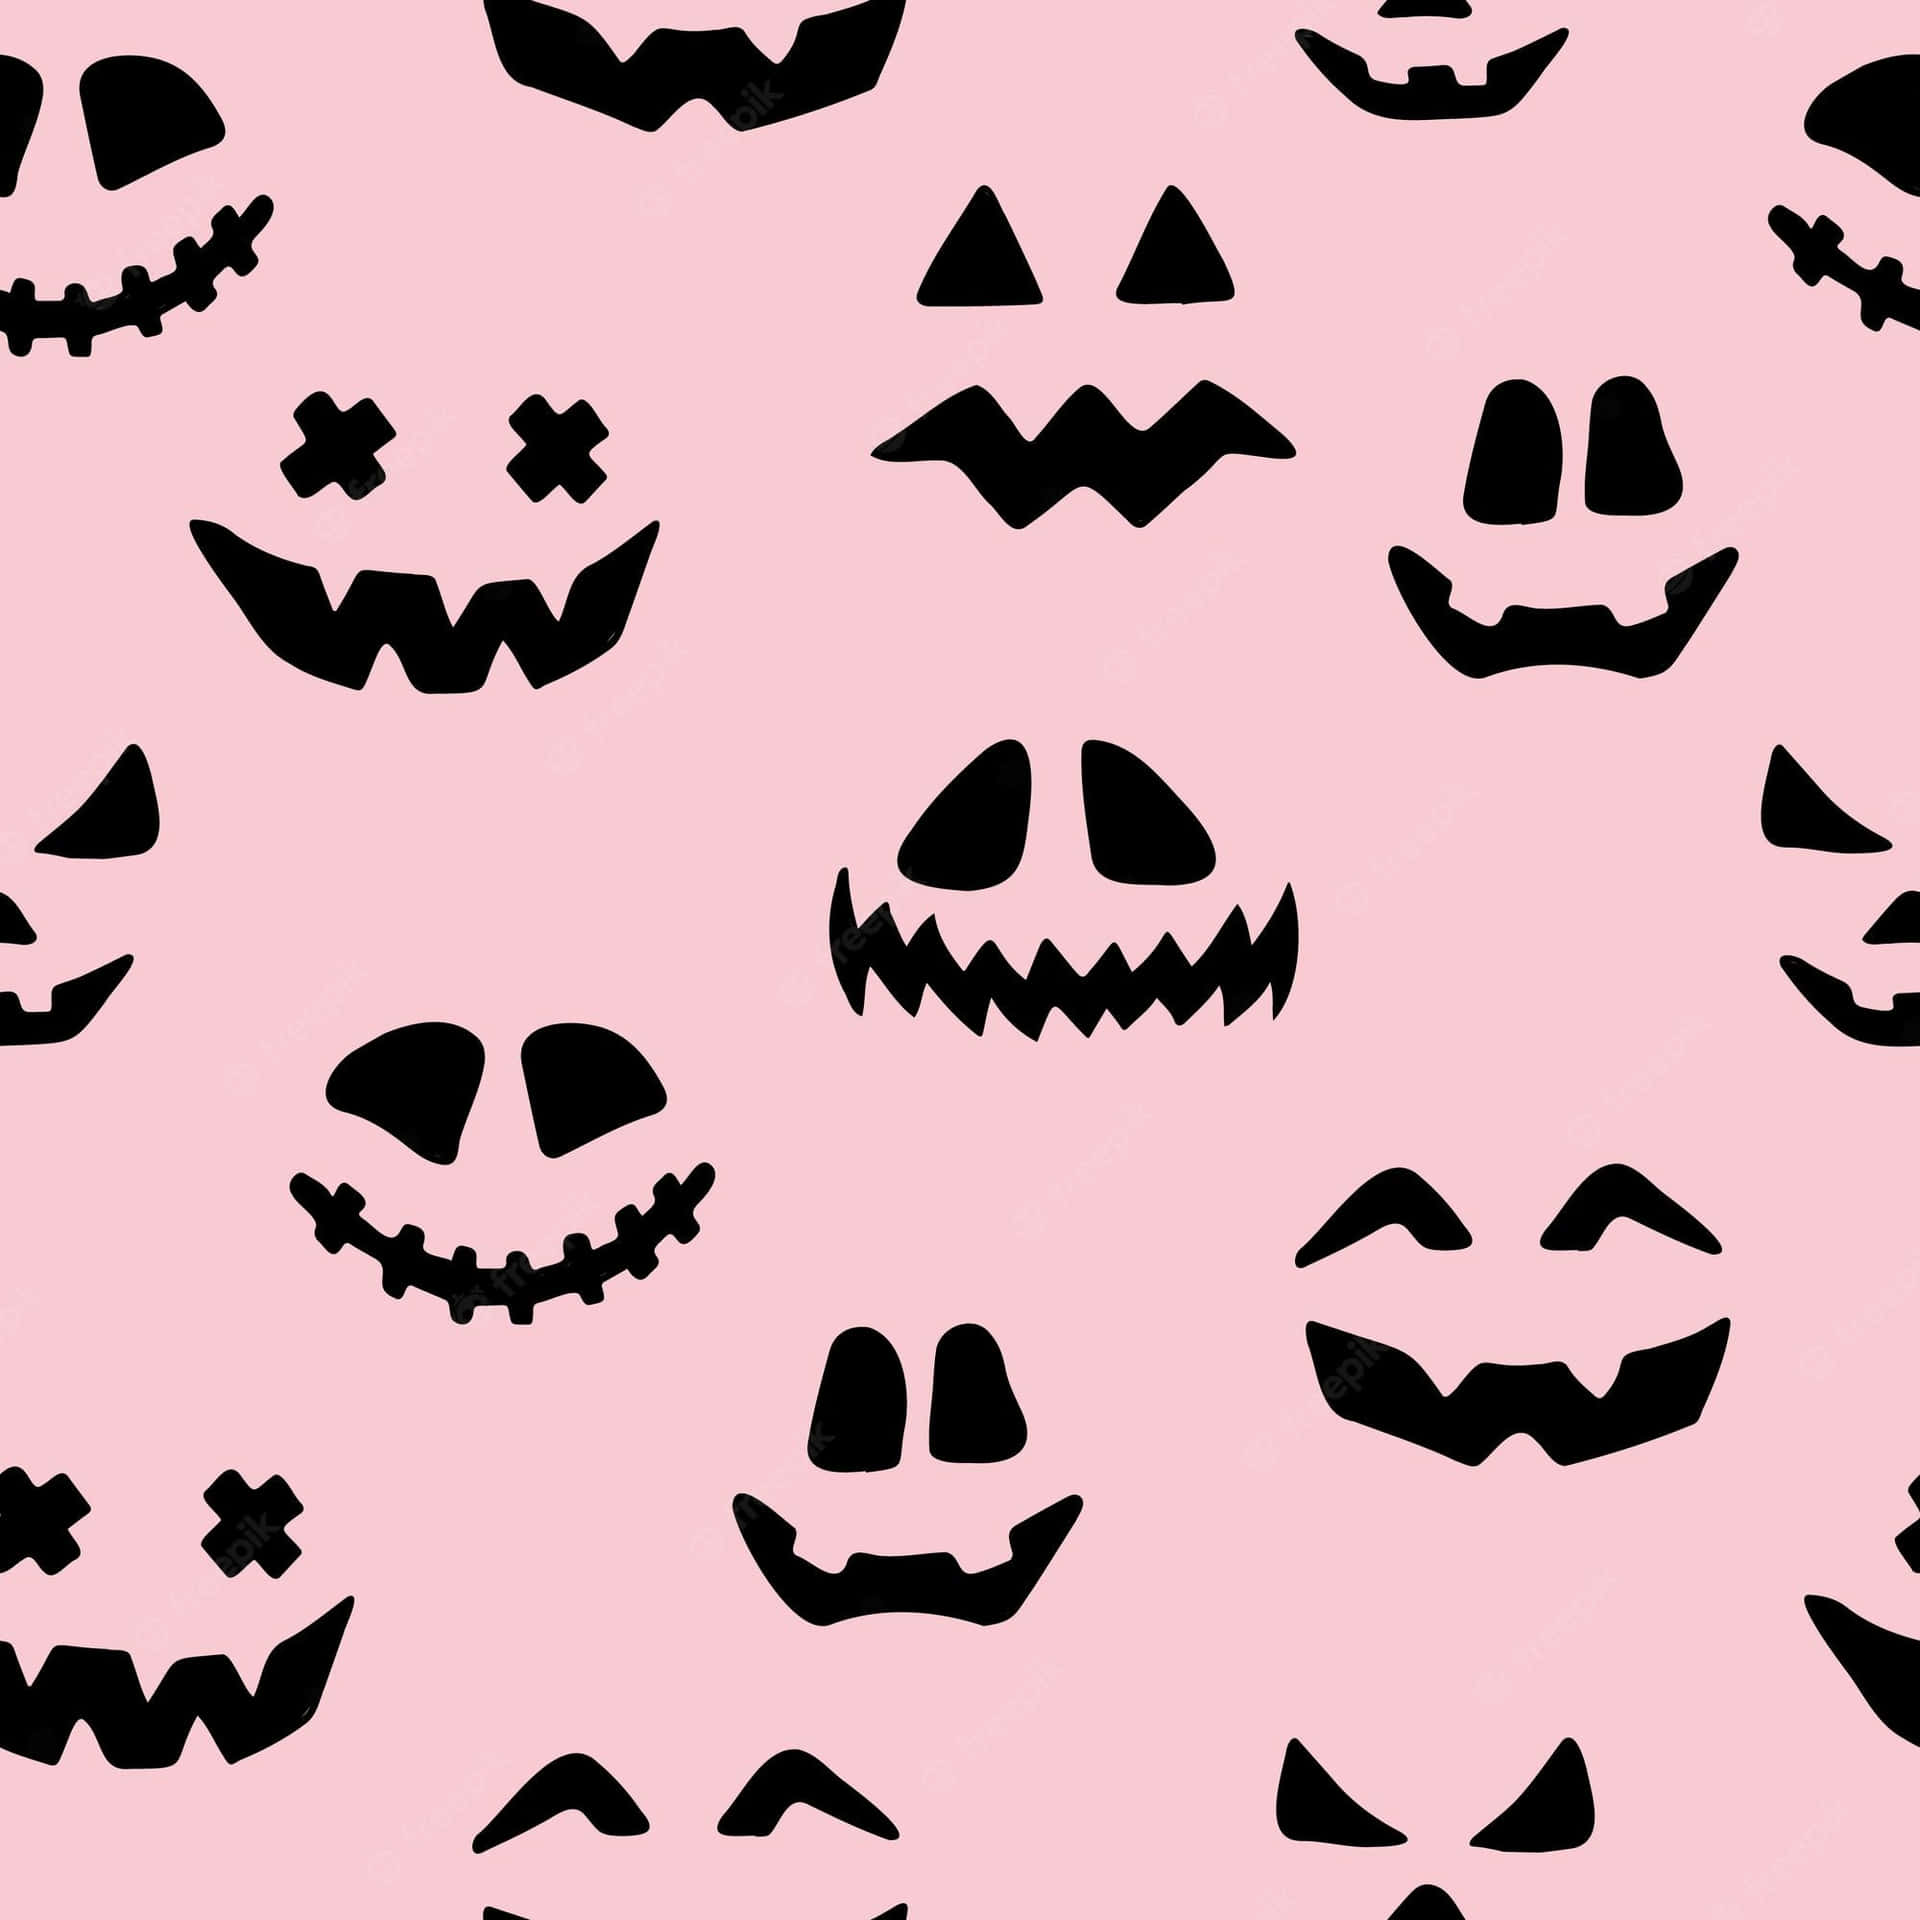 Get spooky while embracing your femininity by celebrating a stylishly pink Halloween.